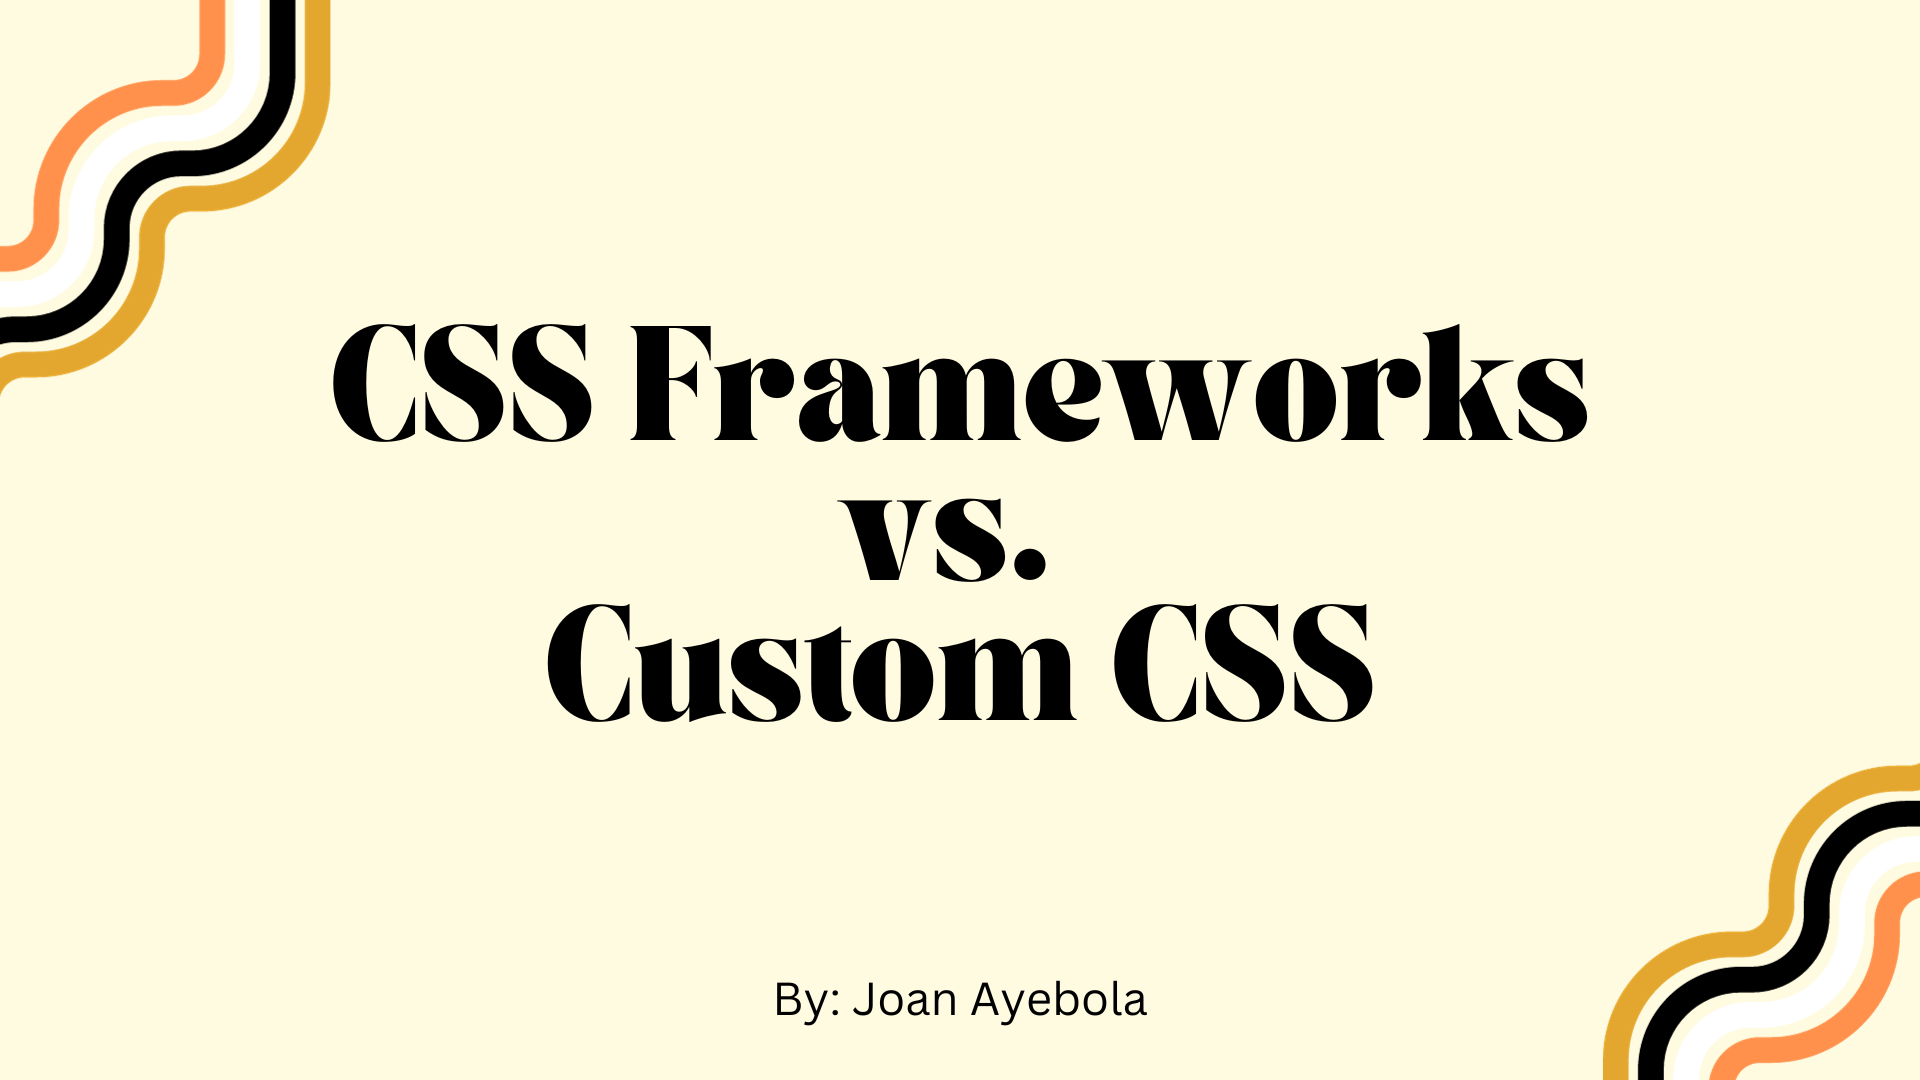 CSS Frameworks vs Custom CSS – What's the Difference?